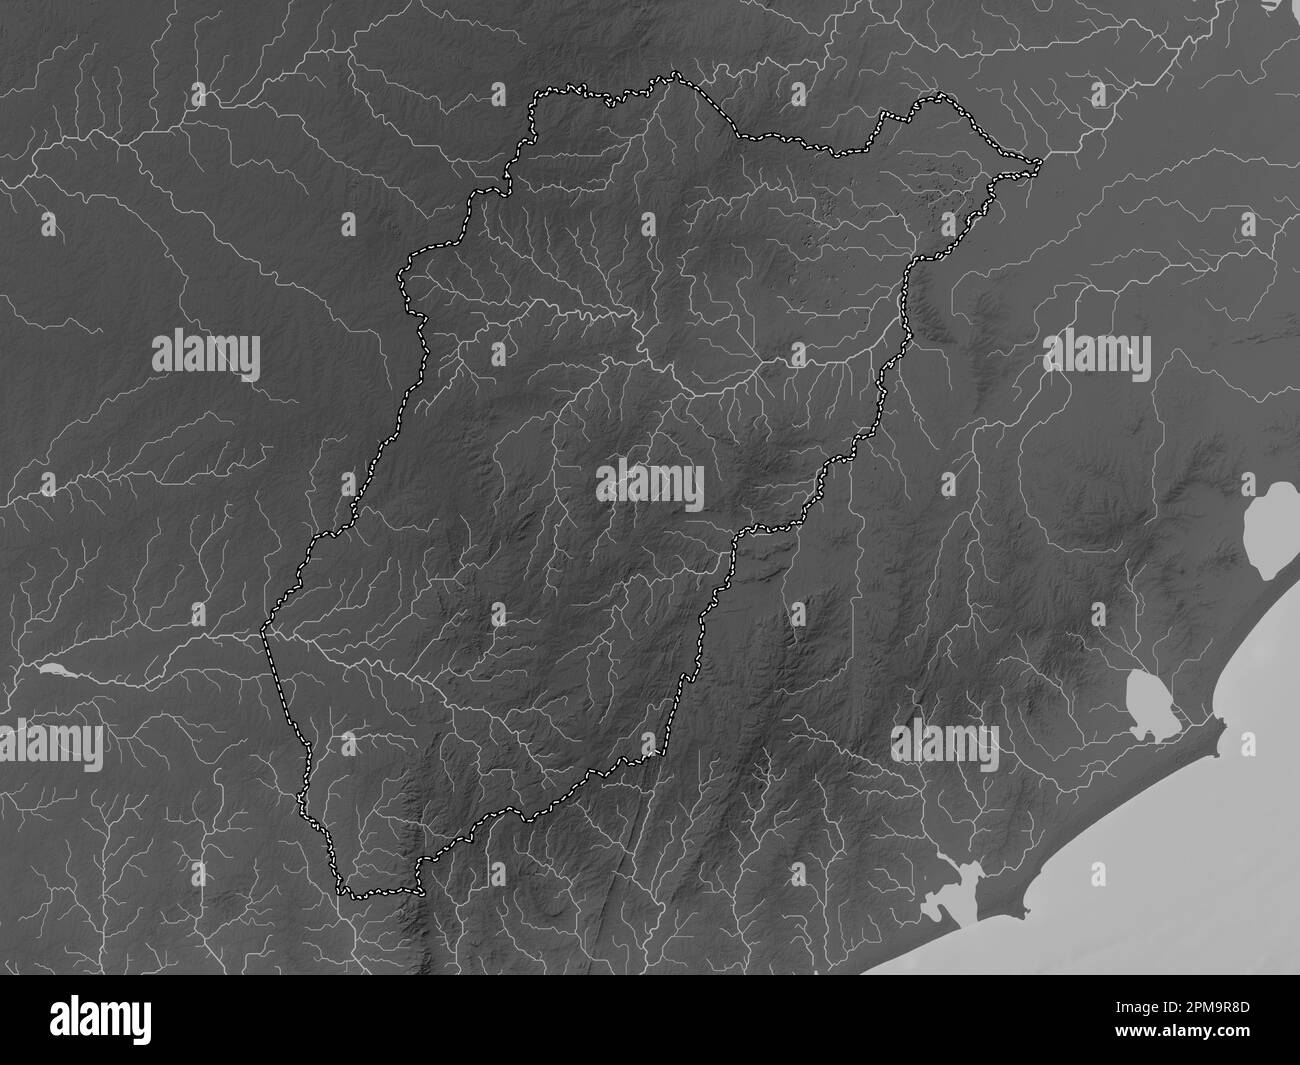 Lavalleja, department of Uruguay. Grayscale elevation map with lakes and rivers Stock Photo